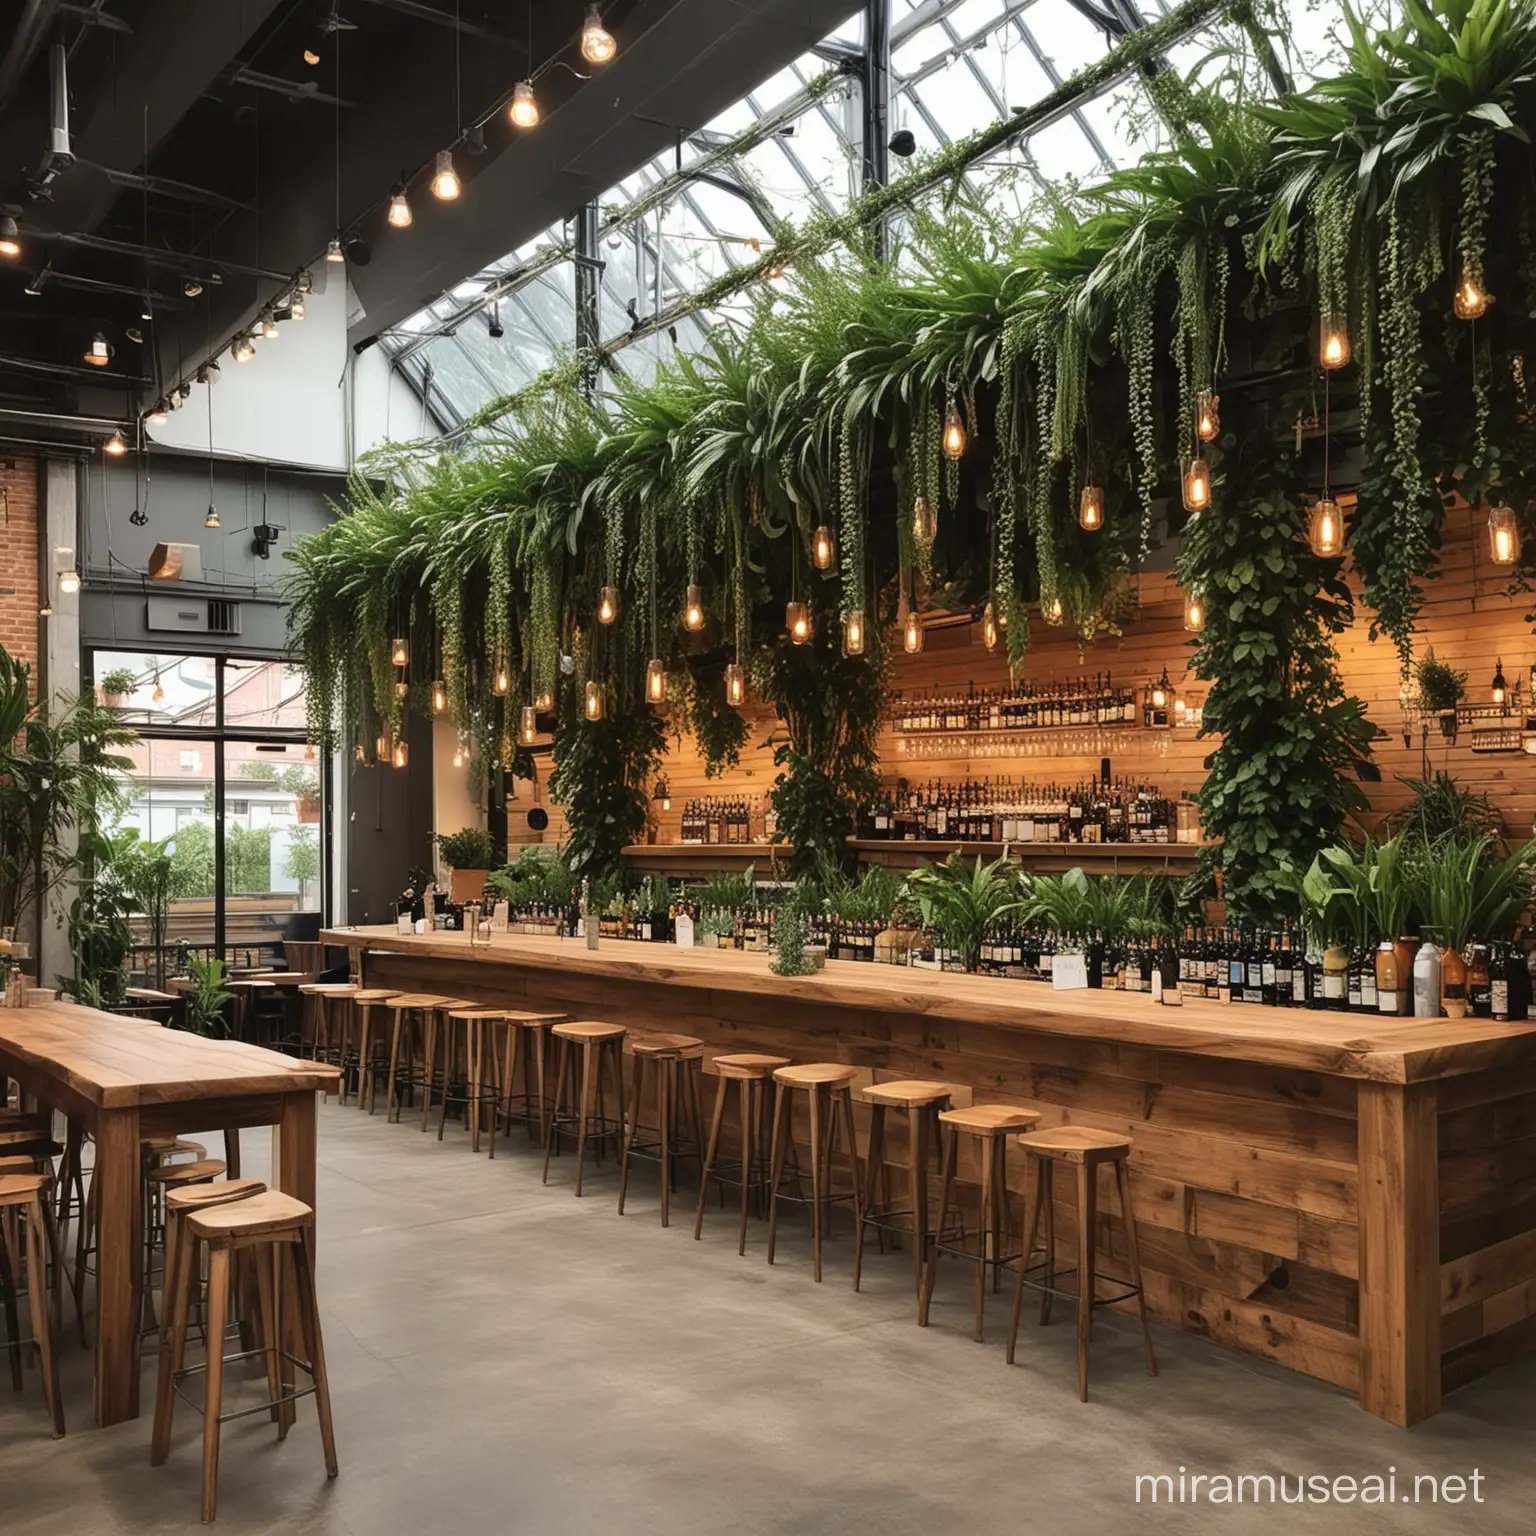 Contemporary Beer Hall with Botanical Elements and CzechNorwegian Design Fusion